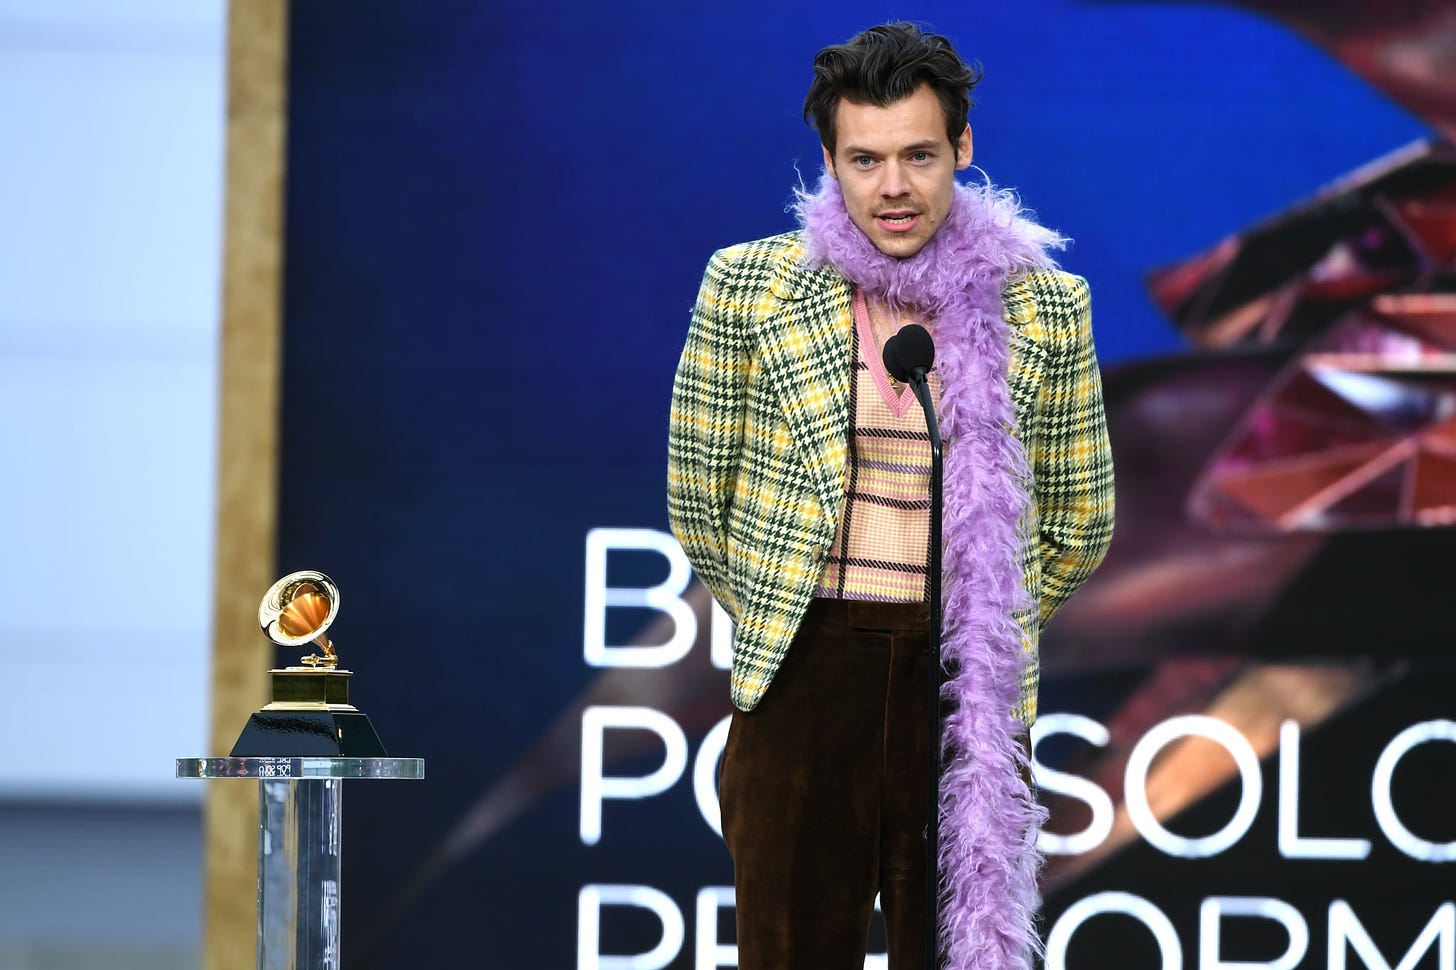 LOS ANGELES, CALIFORNIA - MARCH 14: Harry Styles accepts the Best Pop Solo Performance award for 'Watermelon Sugar' onstage during the 63rd Annual GRAMMY Awards at Los Angeles Convention Center on March 14, 2021 in Los Angeles, California. (Photo by Kevin Winter/Getty Images for The Recording Academy)